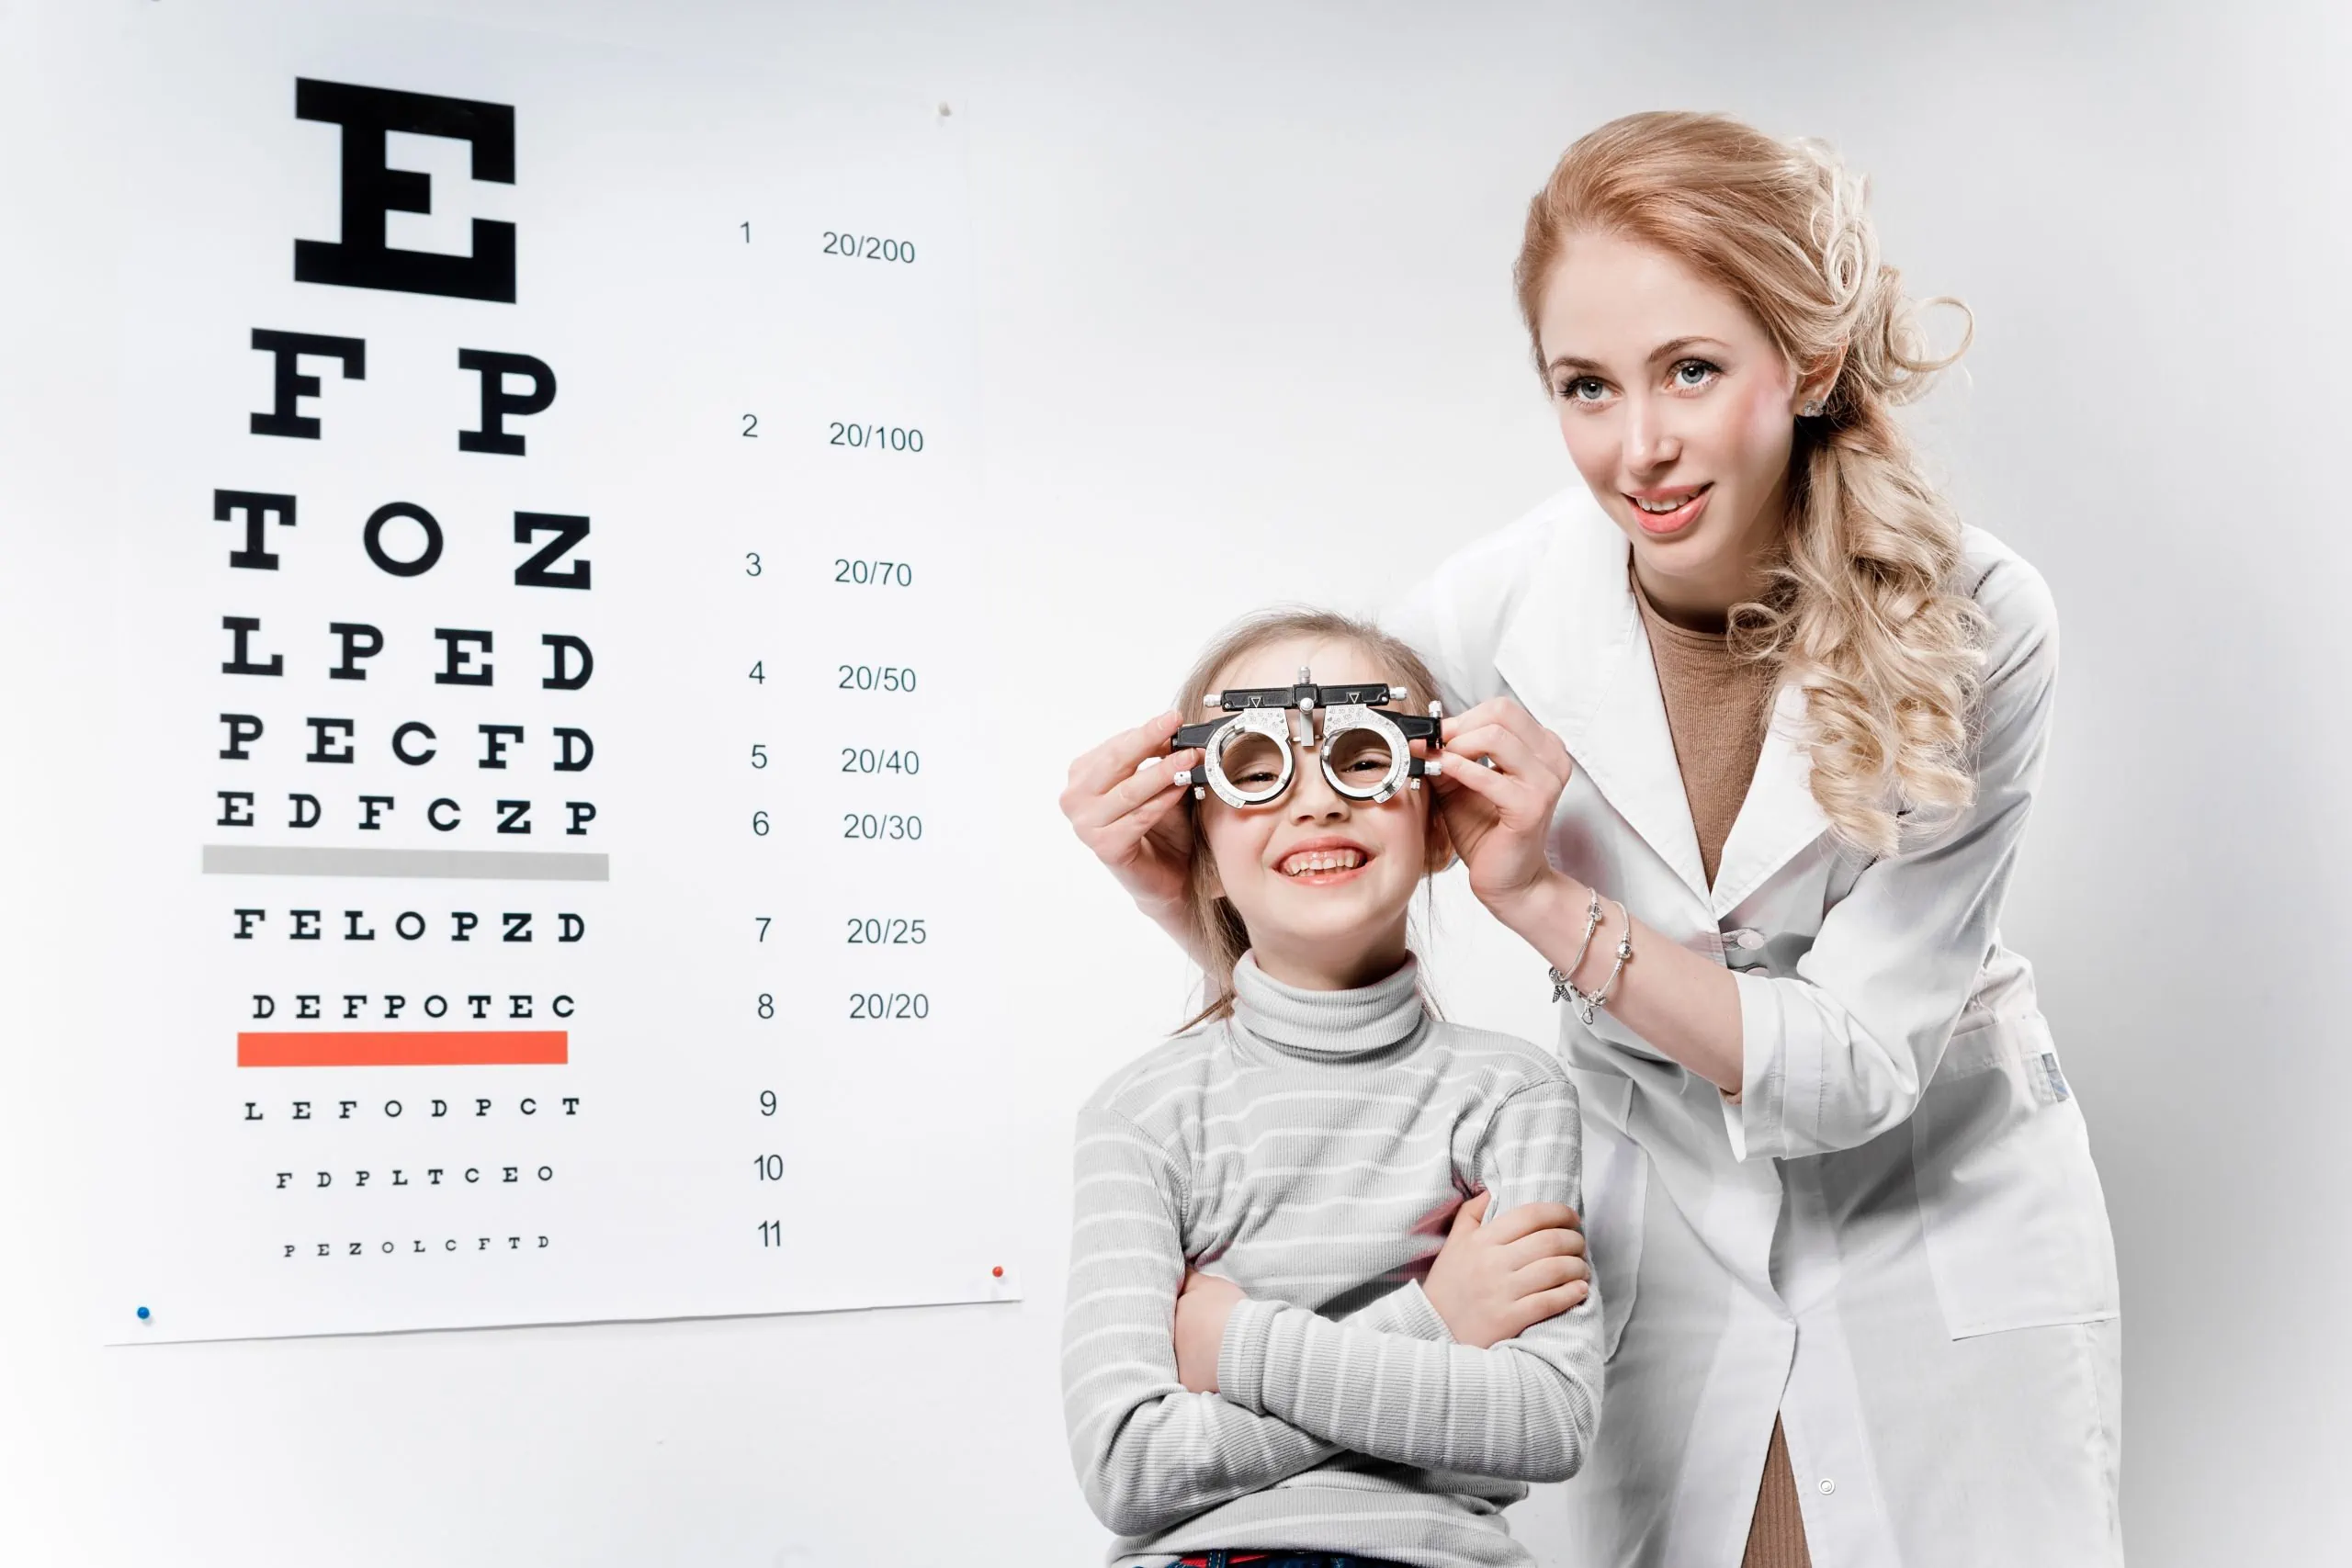 Young girl smiling while undergoing eye test with phoropter